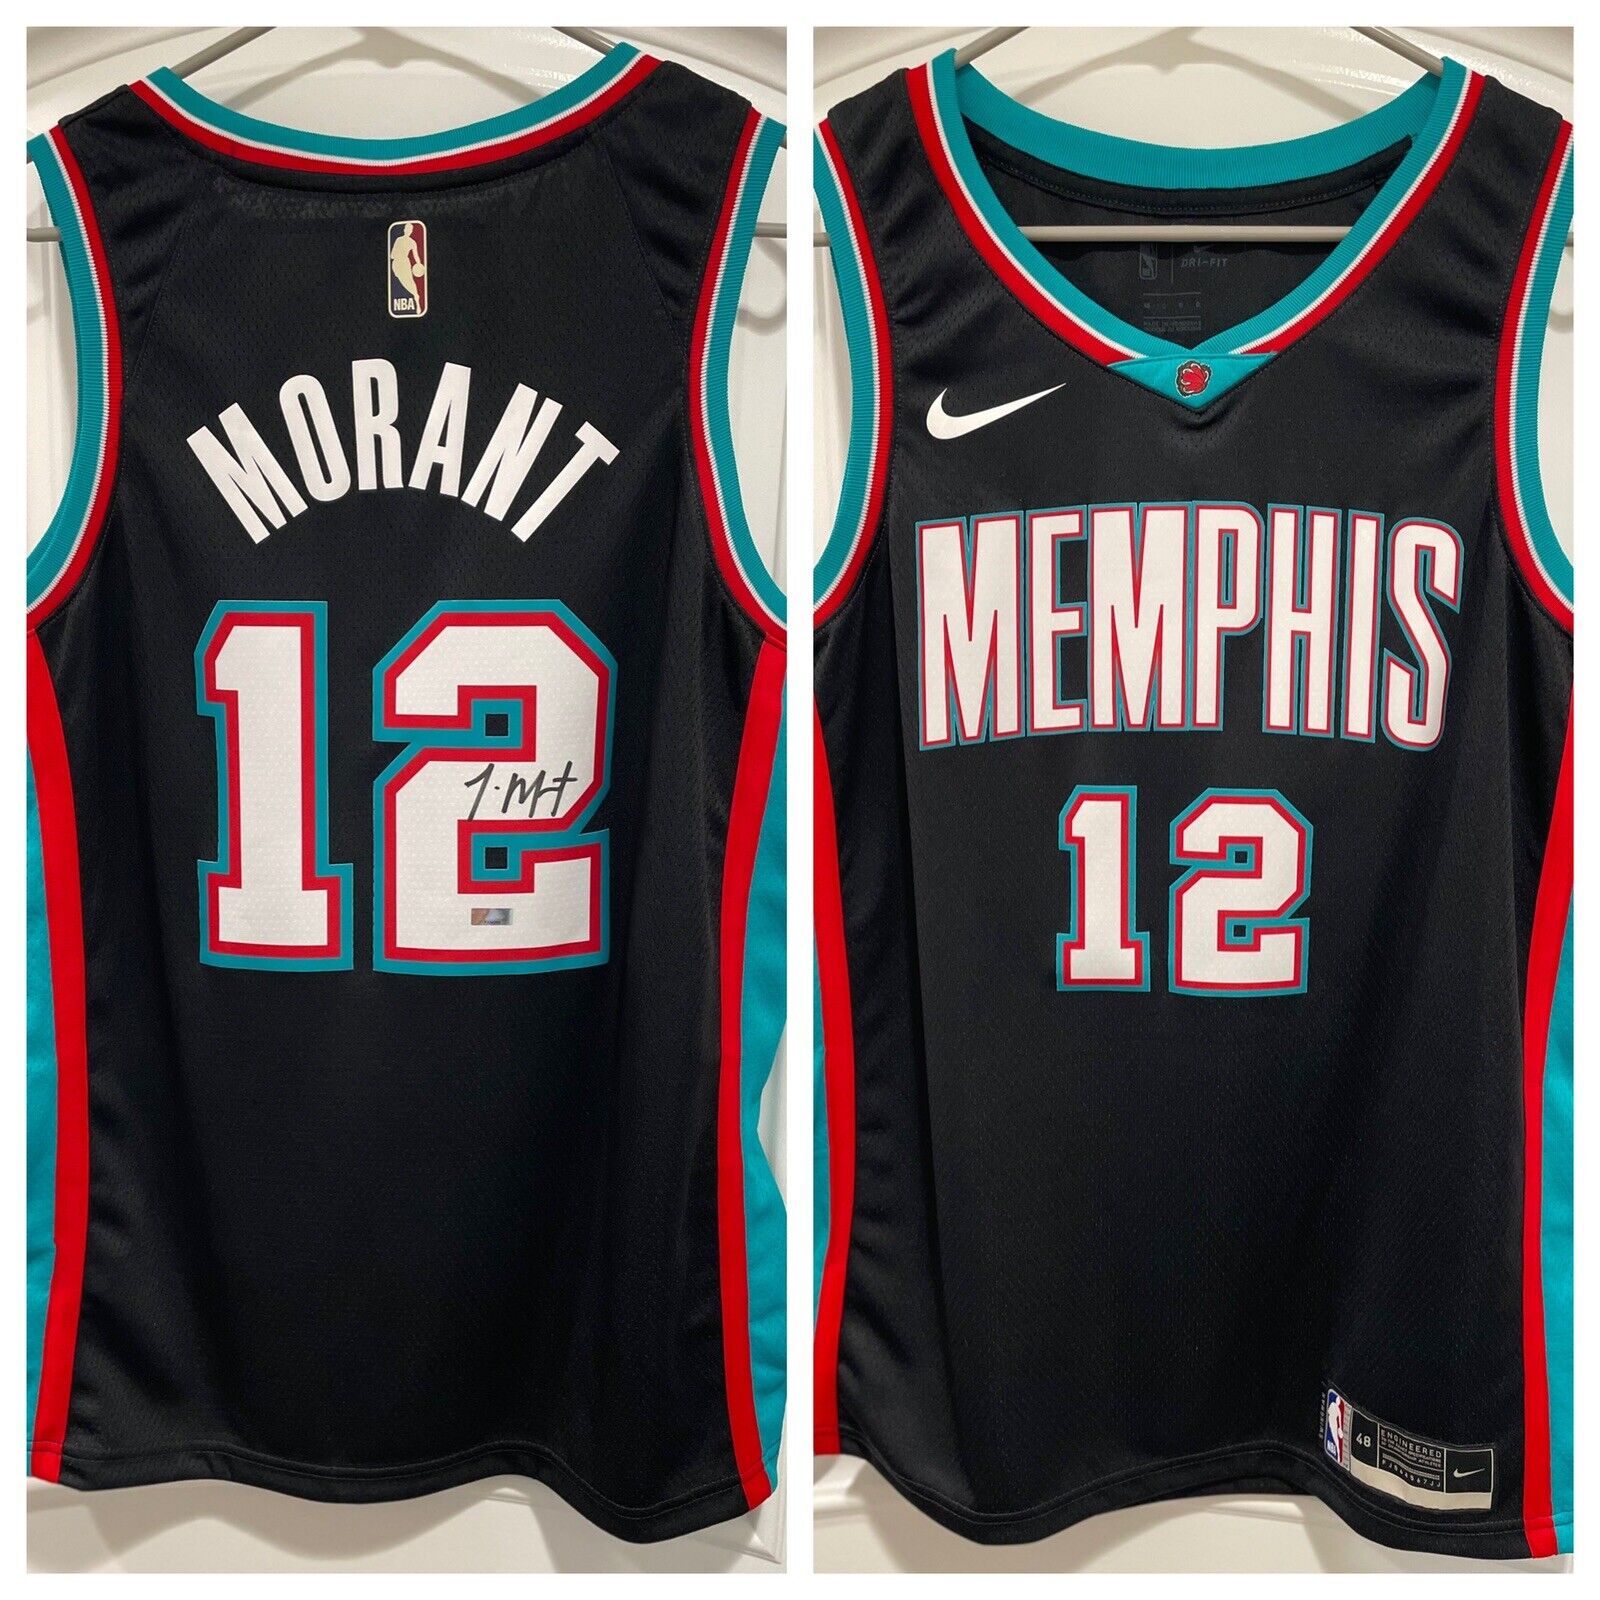 Ja Morant jersey collection guide: How to choose the jersey that best suits your heart插图